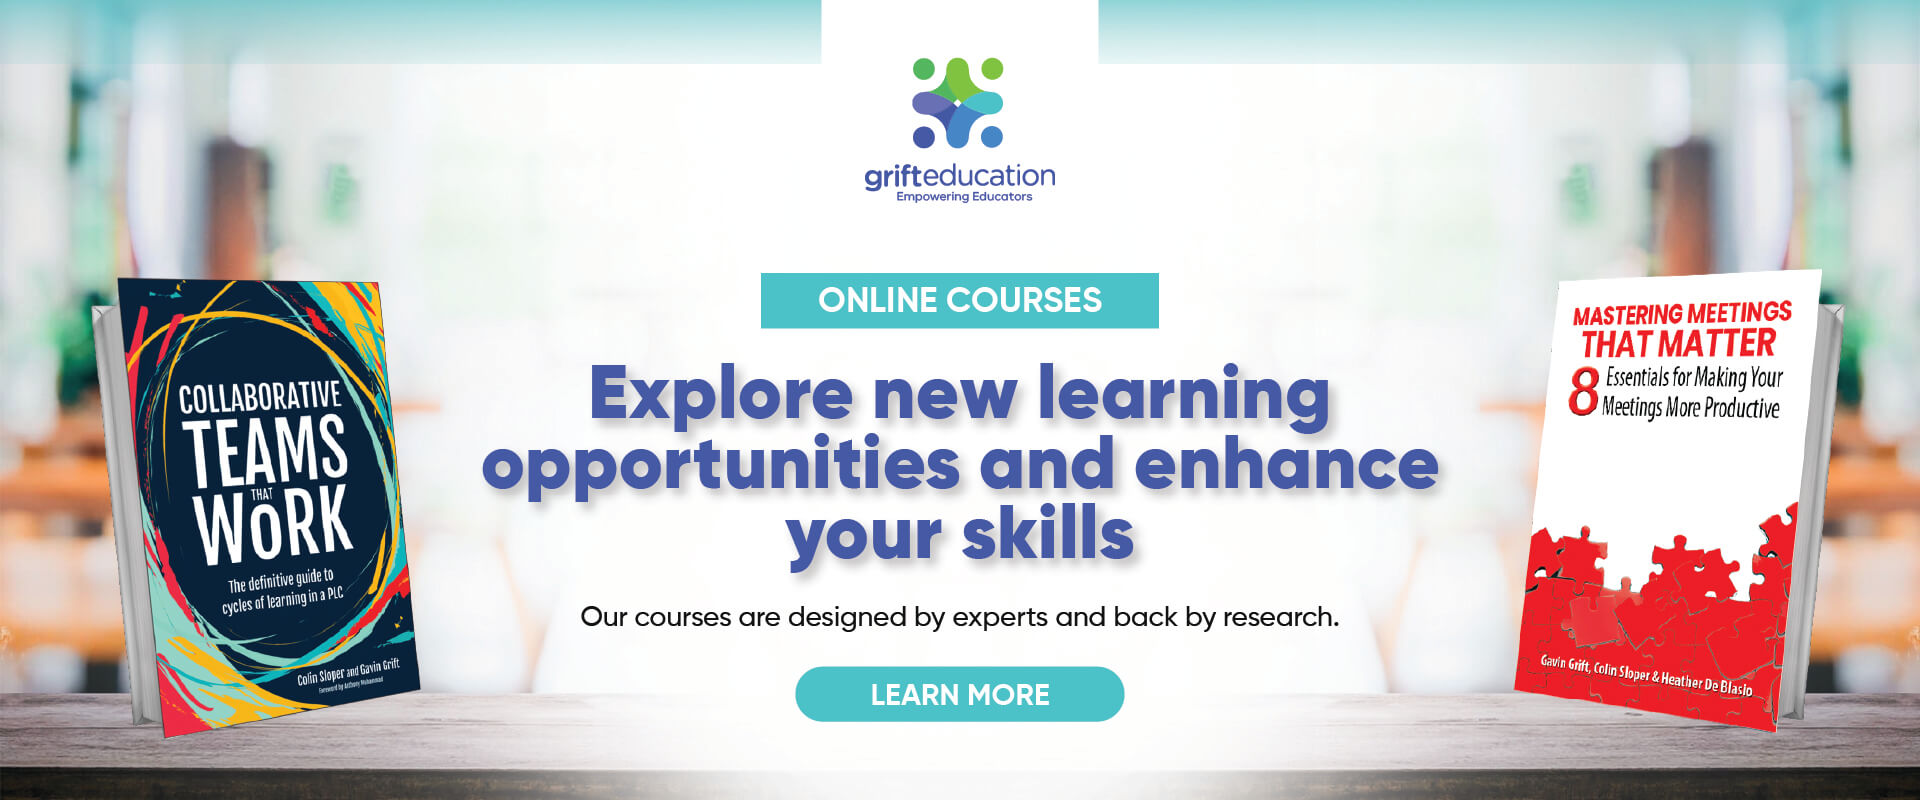 Explore New Learning Opportunity and Enhance Your Skills